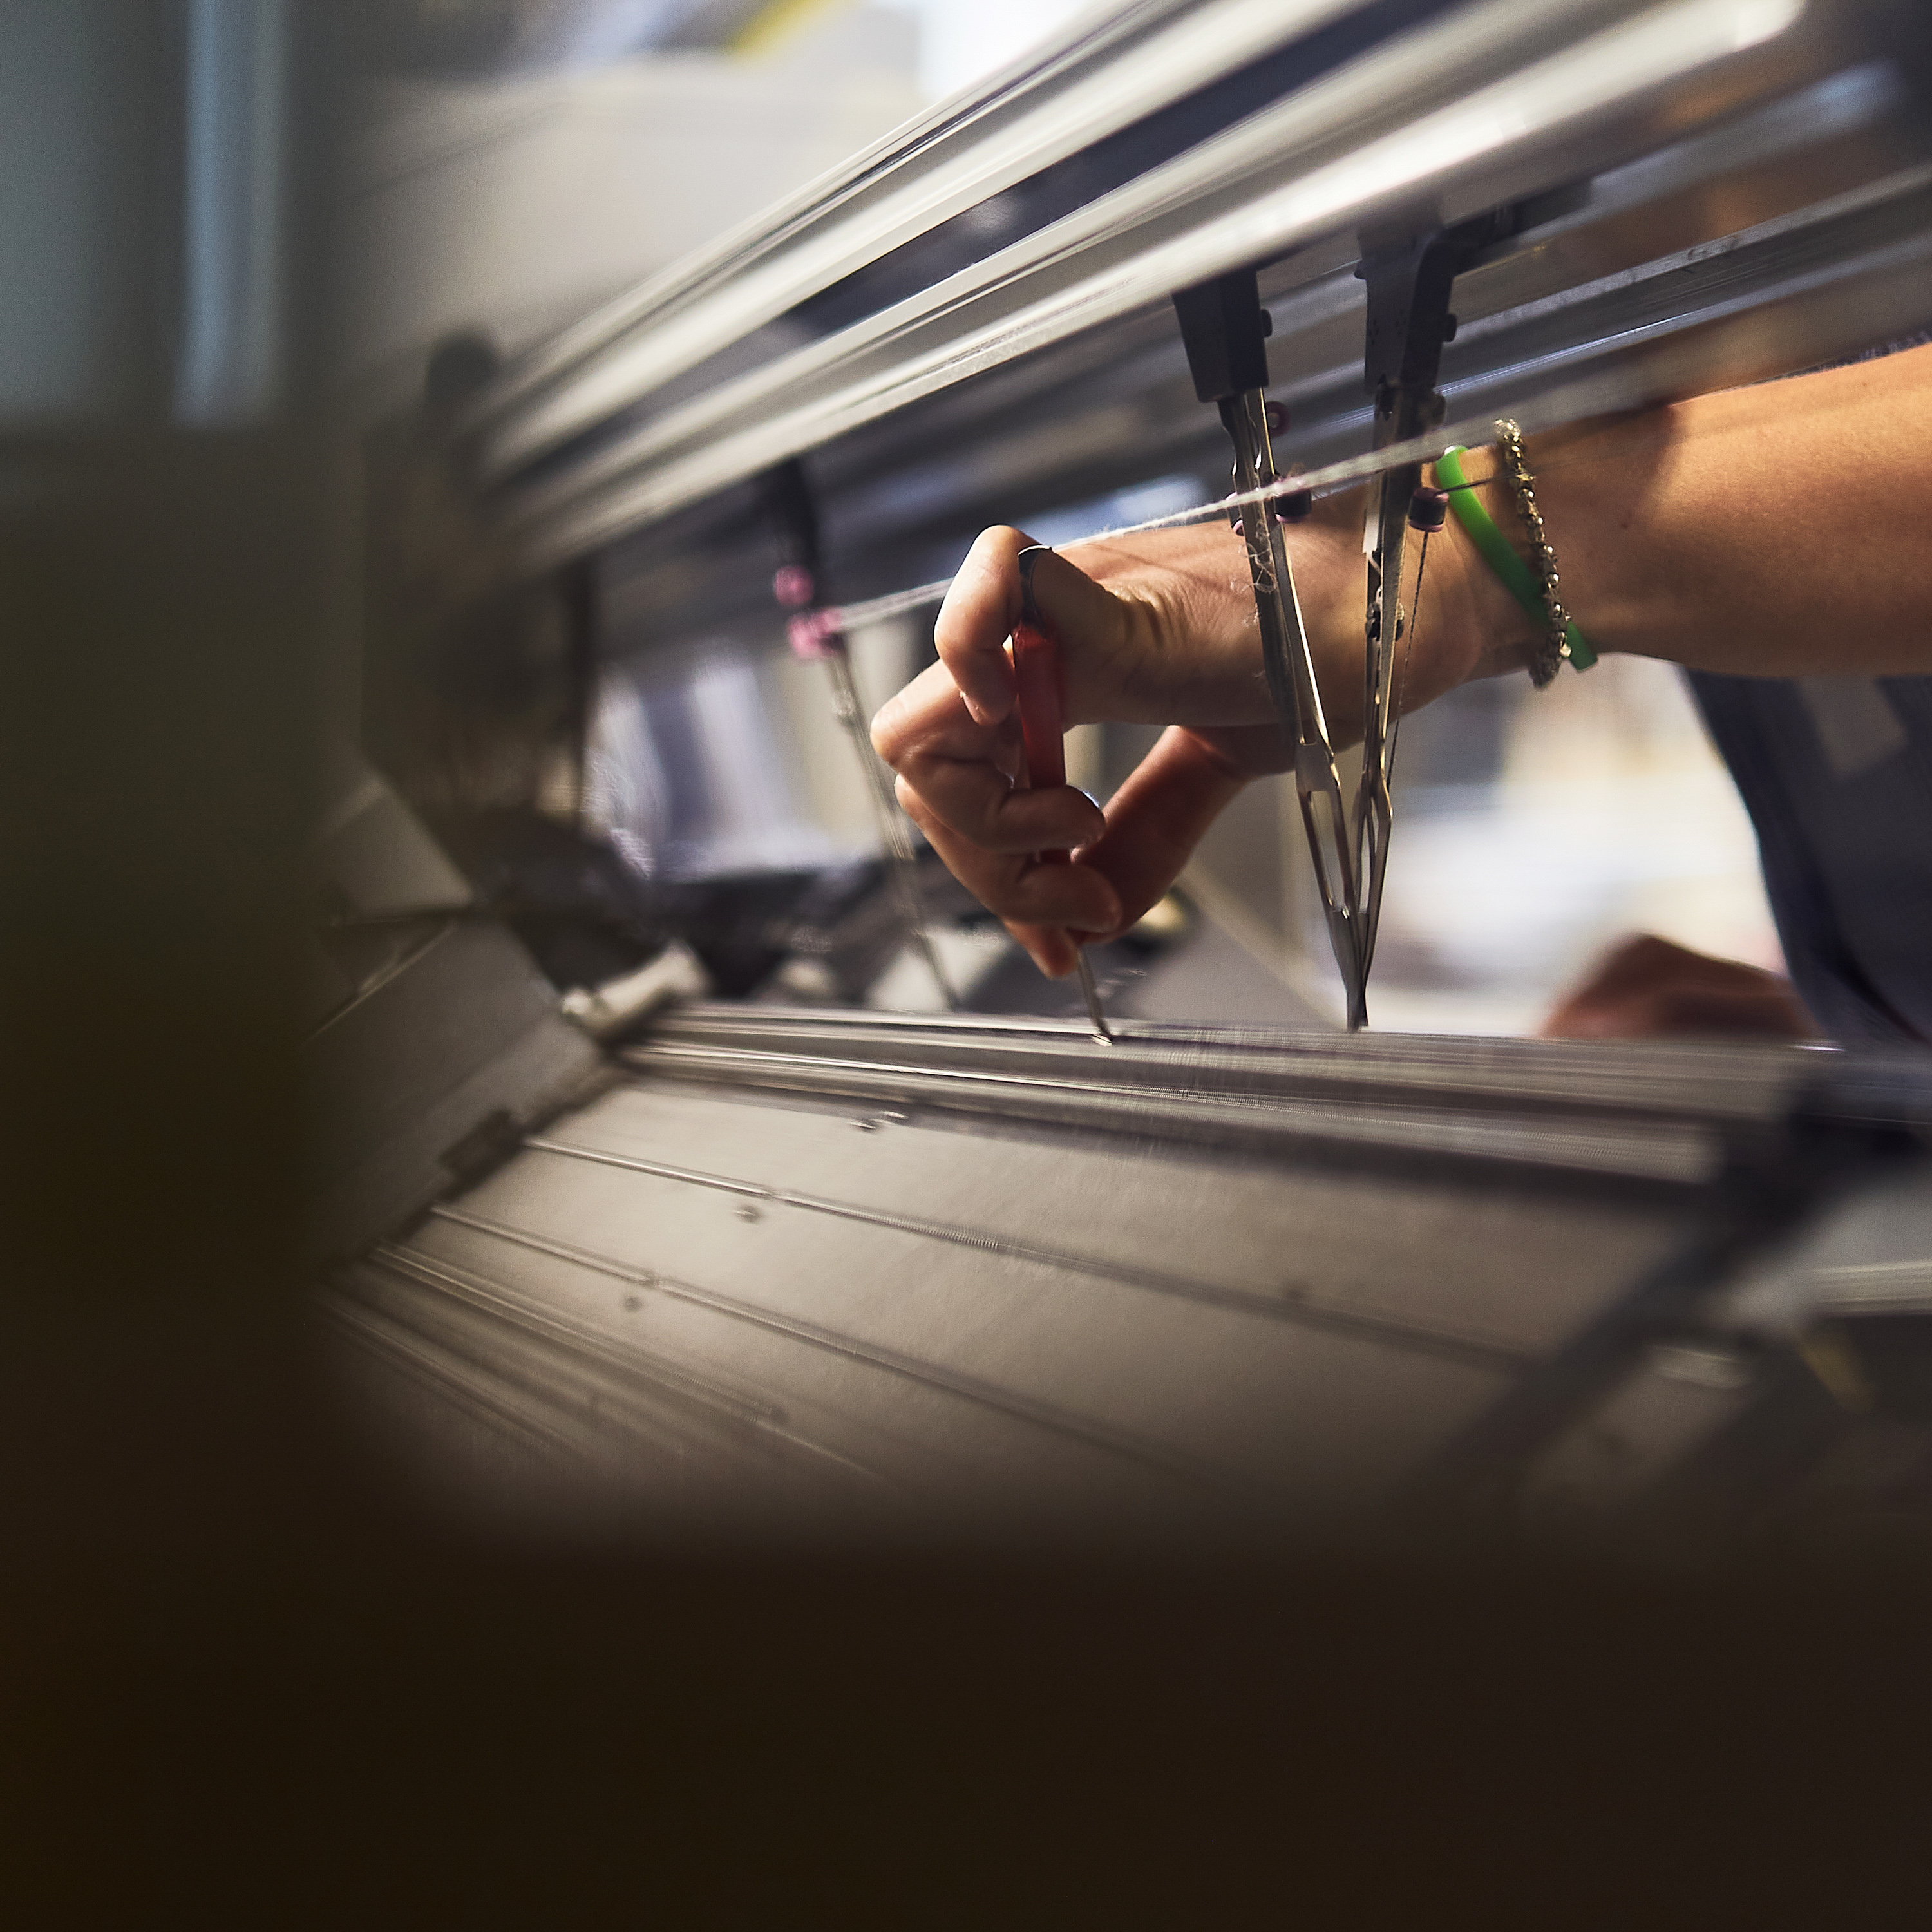 Maglificio Pini makes approximately 50,000 pieces each year for some of the world’s leading brands, with a highly skilled staff of 45 and around 30 Shima Seiki flat knitting machines. © Maglificio Pini